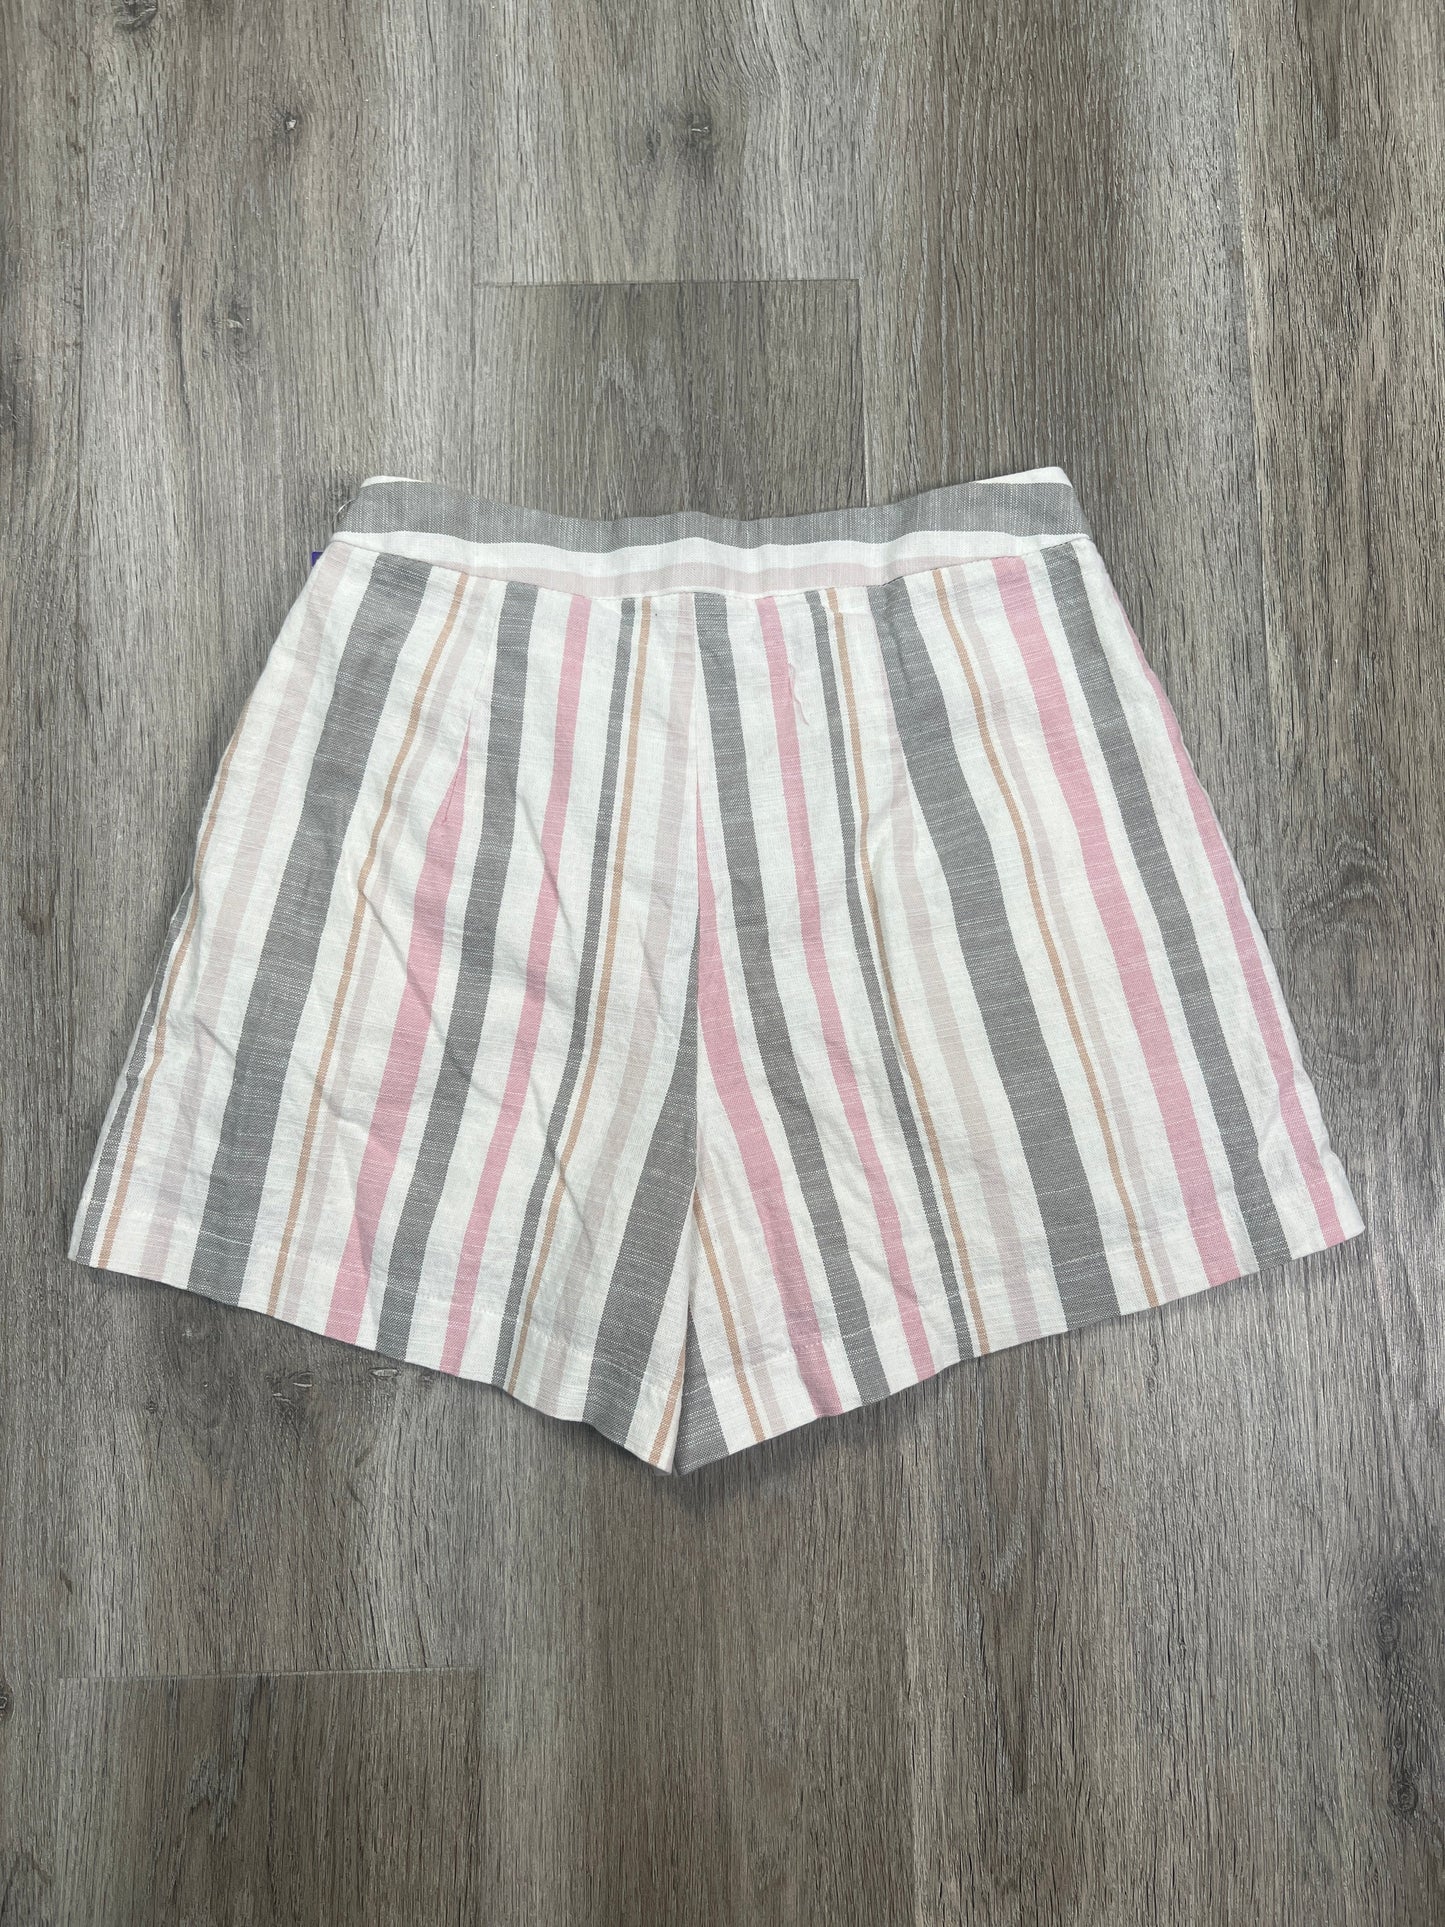 Shorts By Lush  Size: S